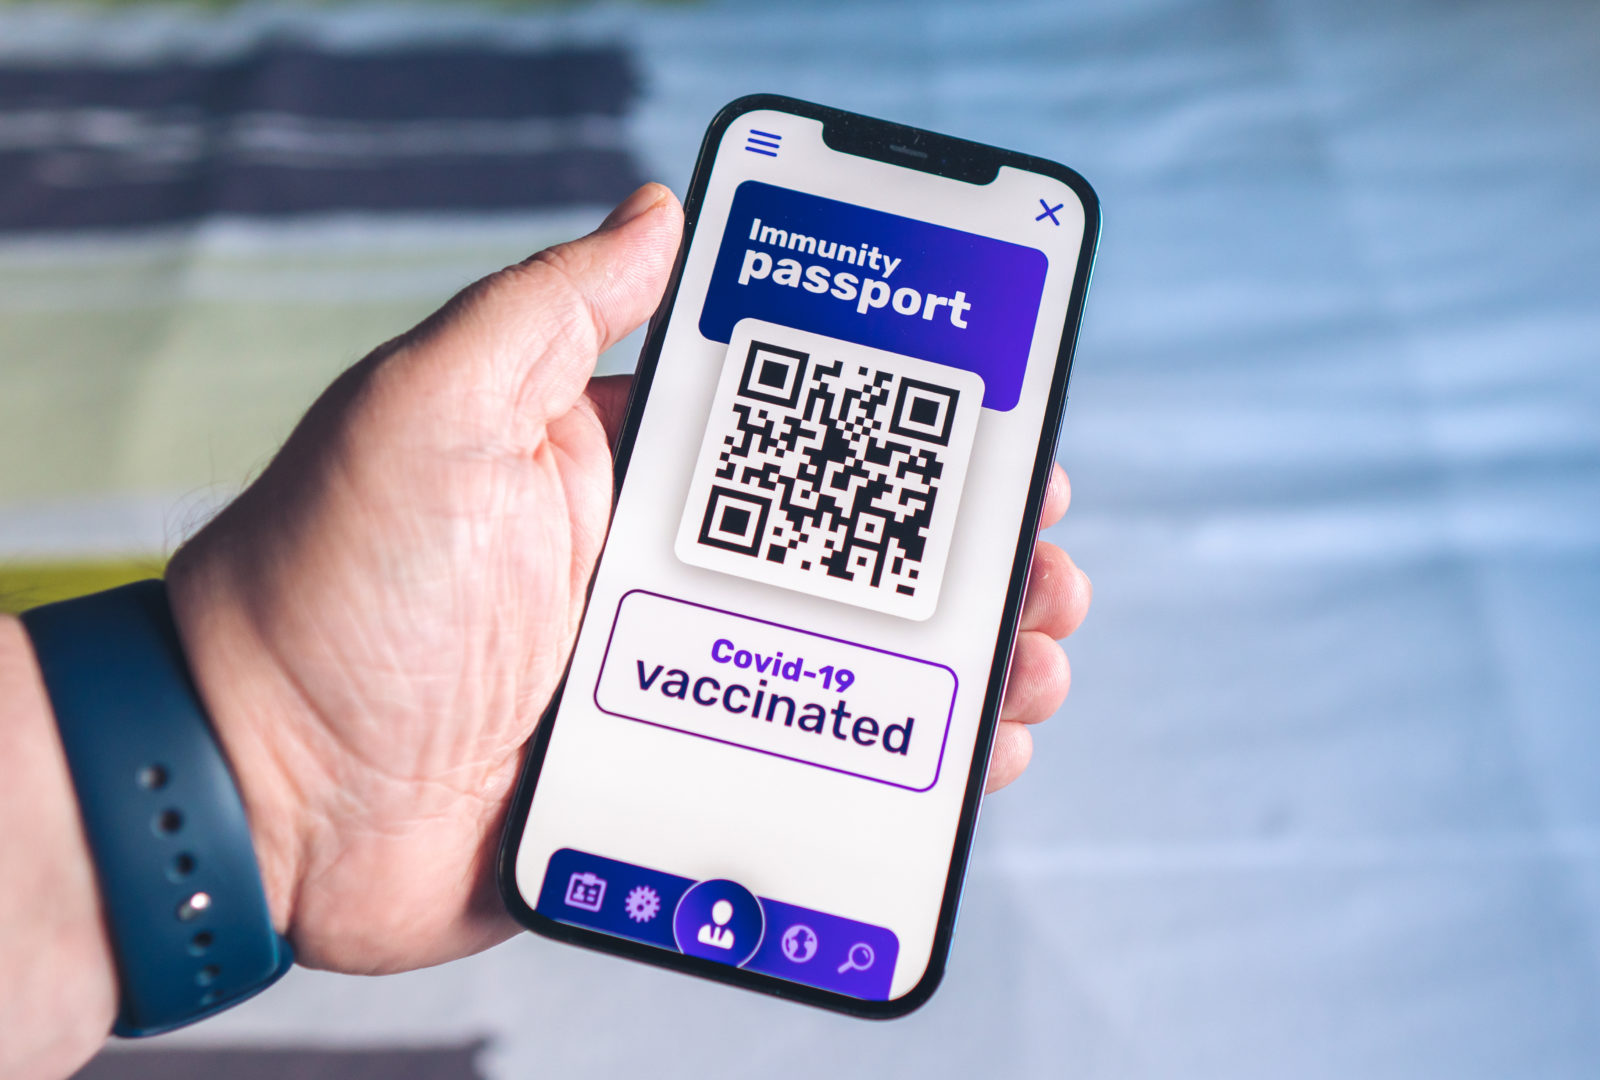 Vaccination passport on a mobile phone allowing movement and travel - Vaccination against the coronavirus Covid 19 - Imunity passport - Health passport